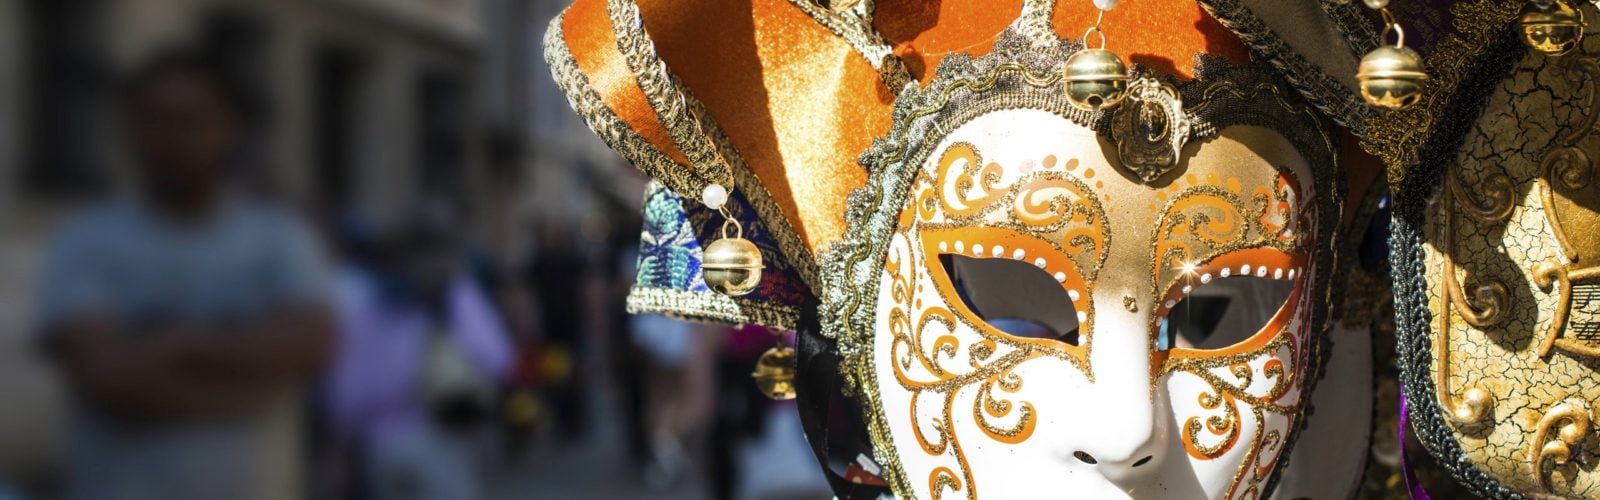 A Venetian mask out in full display.